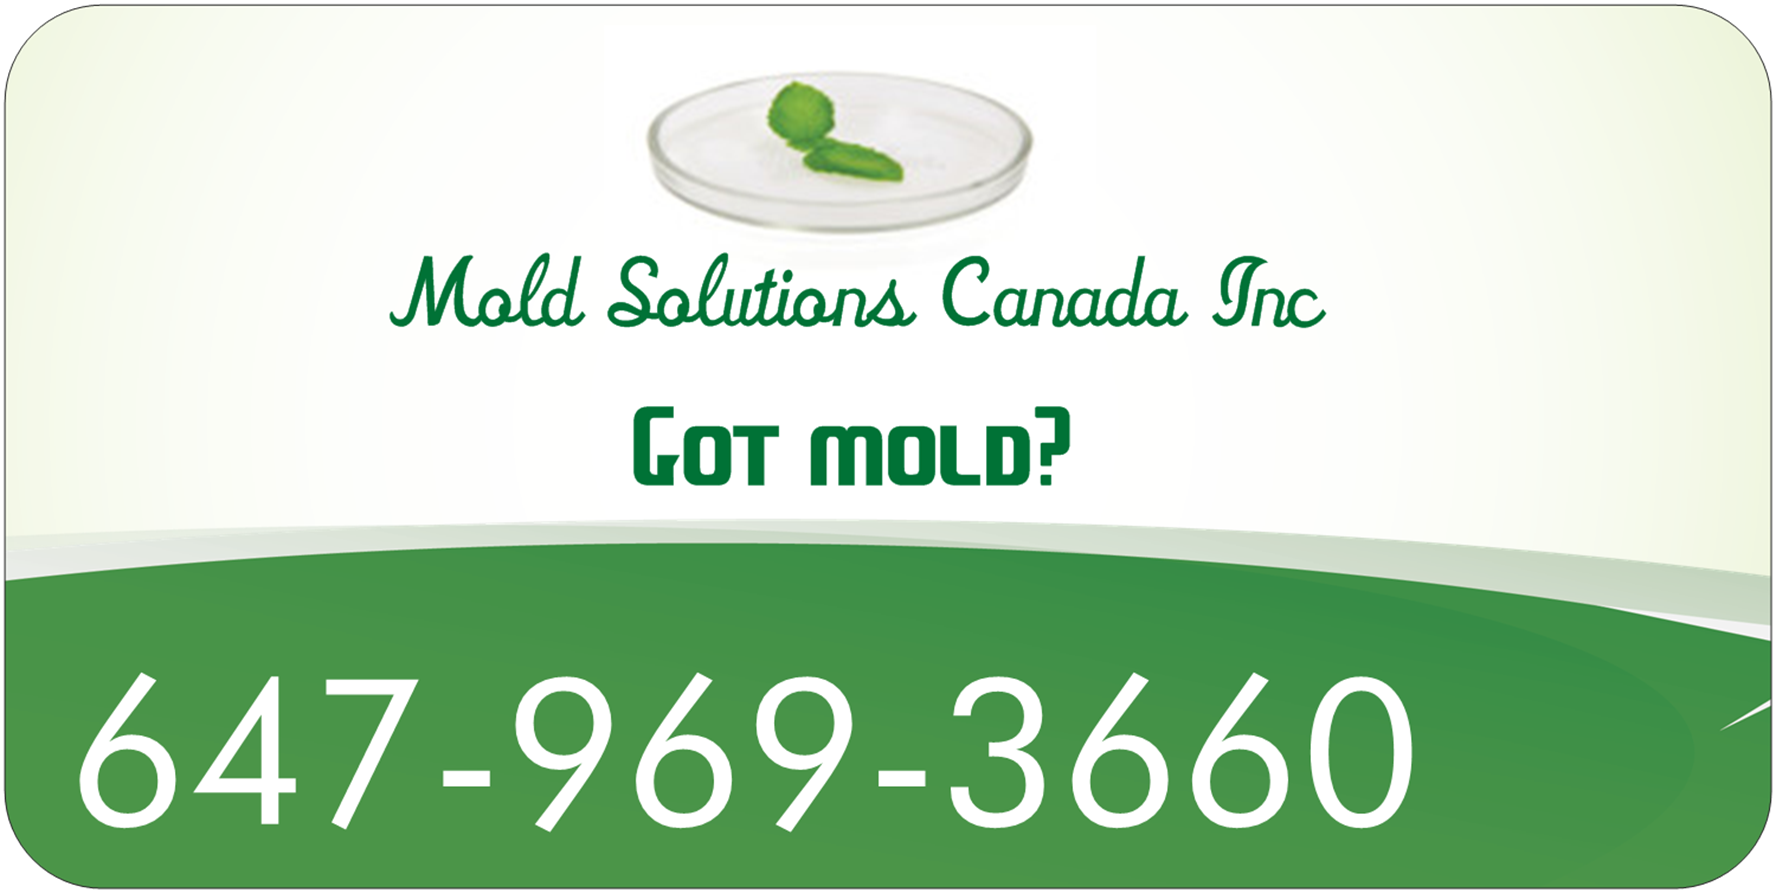 Mold Solutions Canada​'s logo